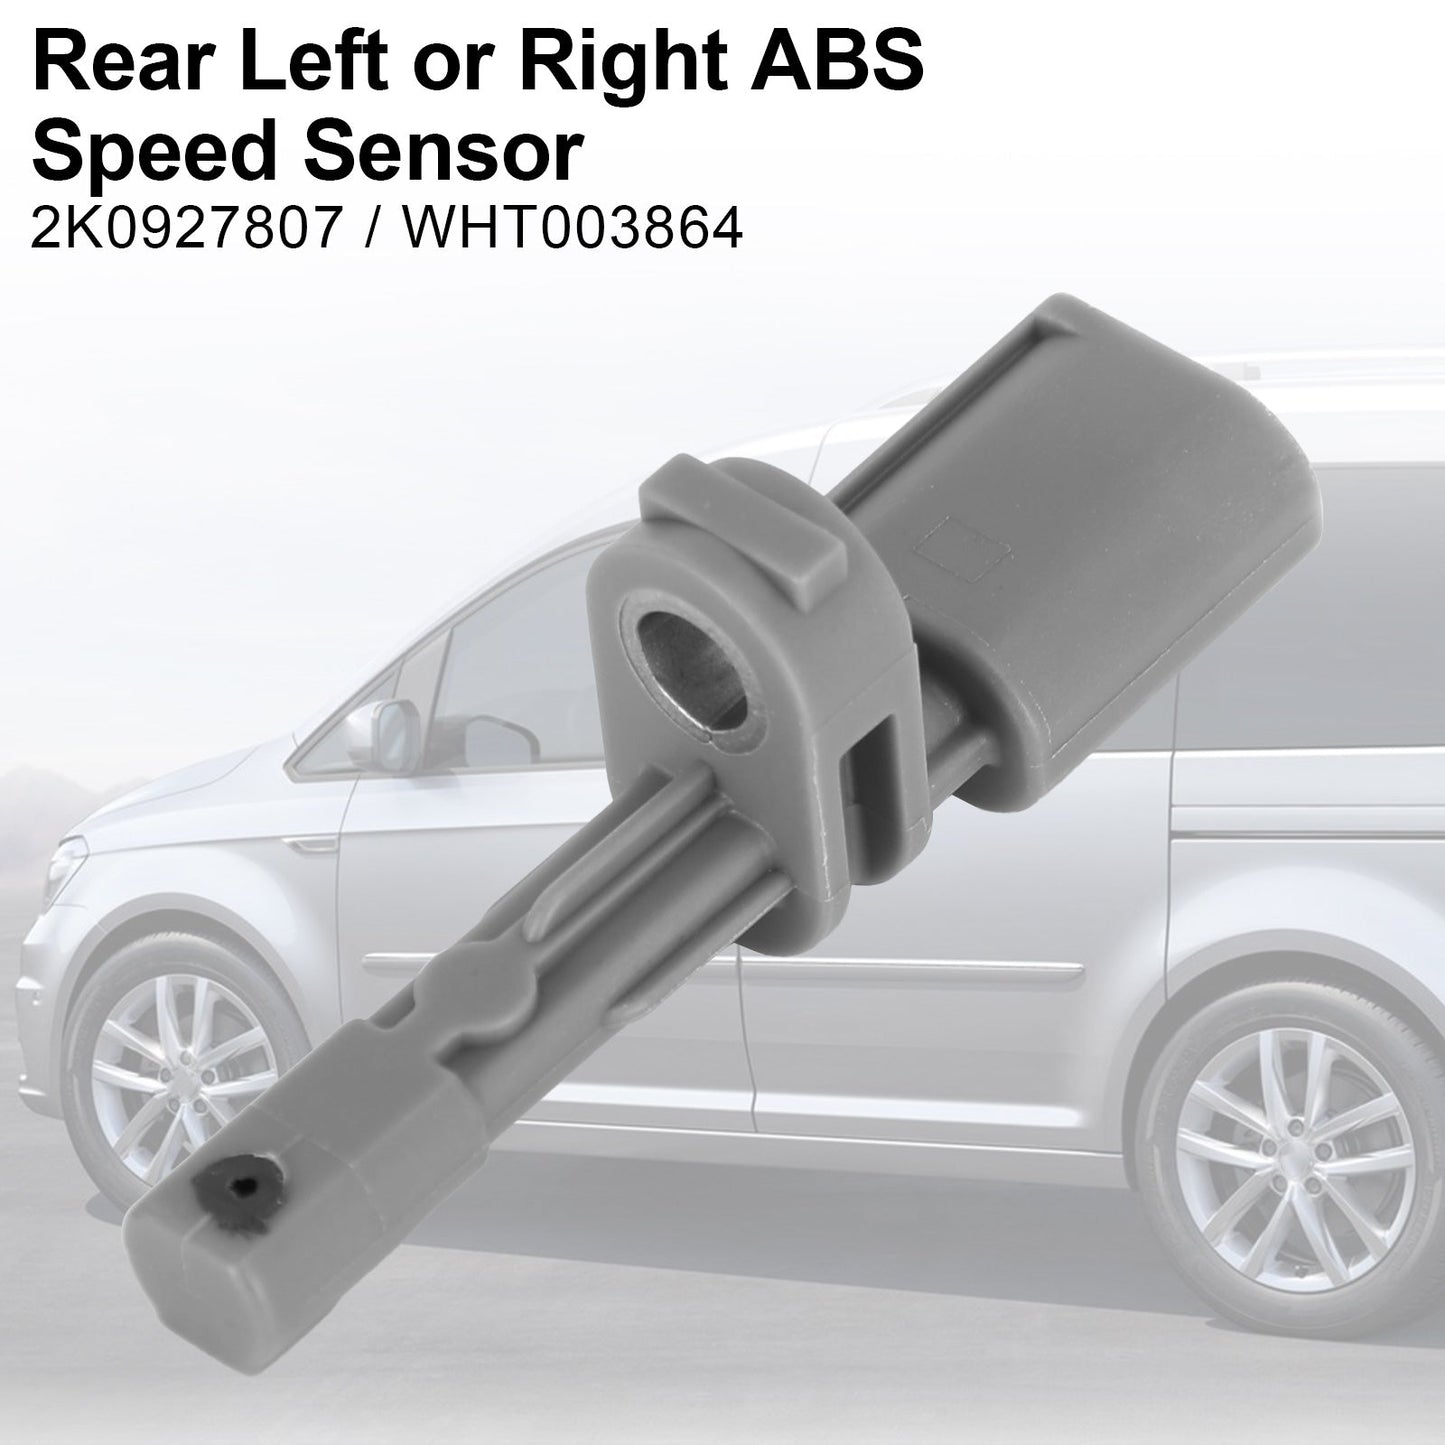 Rear Left or Right ABS Speed Sensor for VW Caddy Golf WHT003864 2K0927807